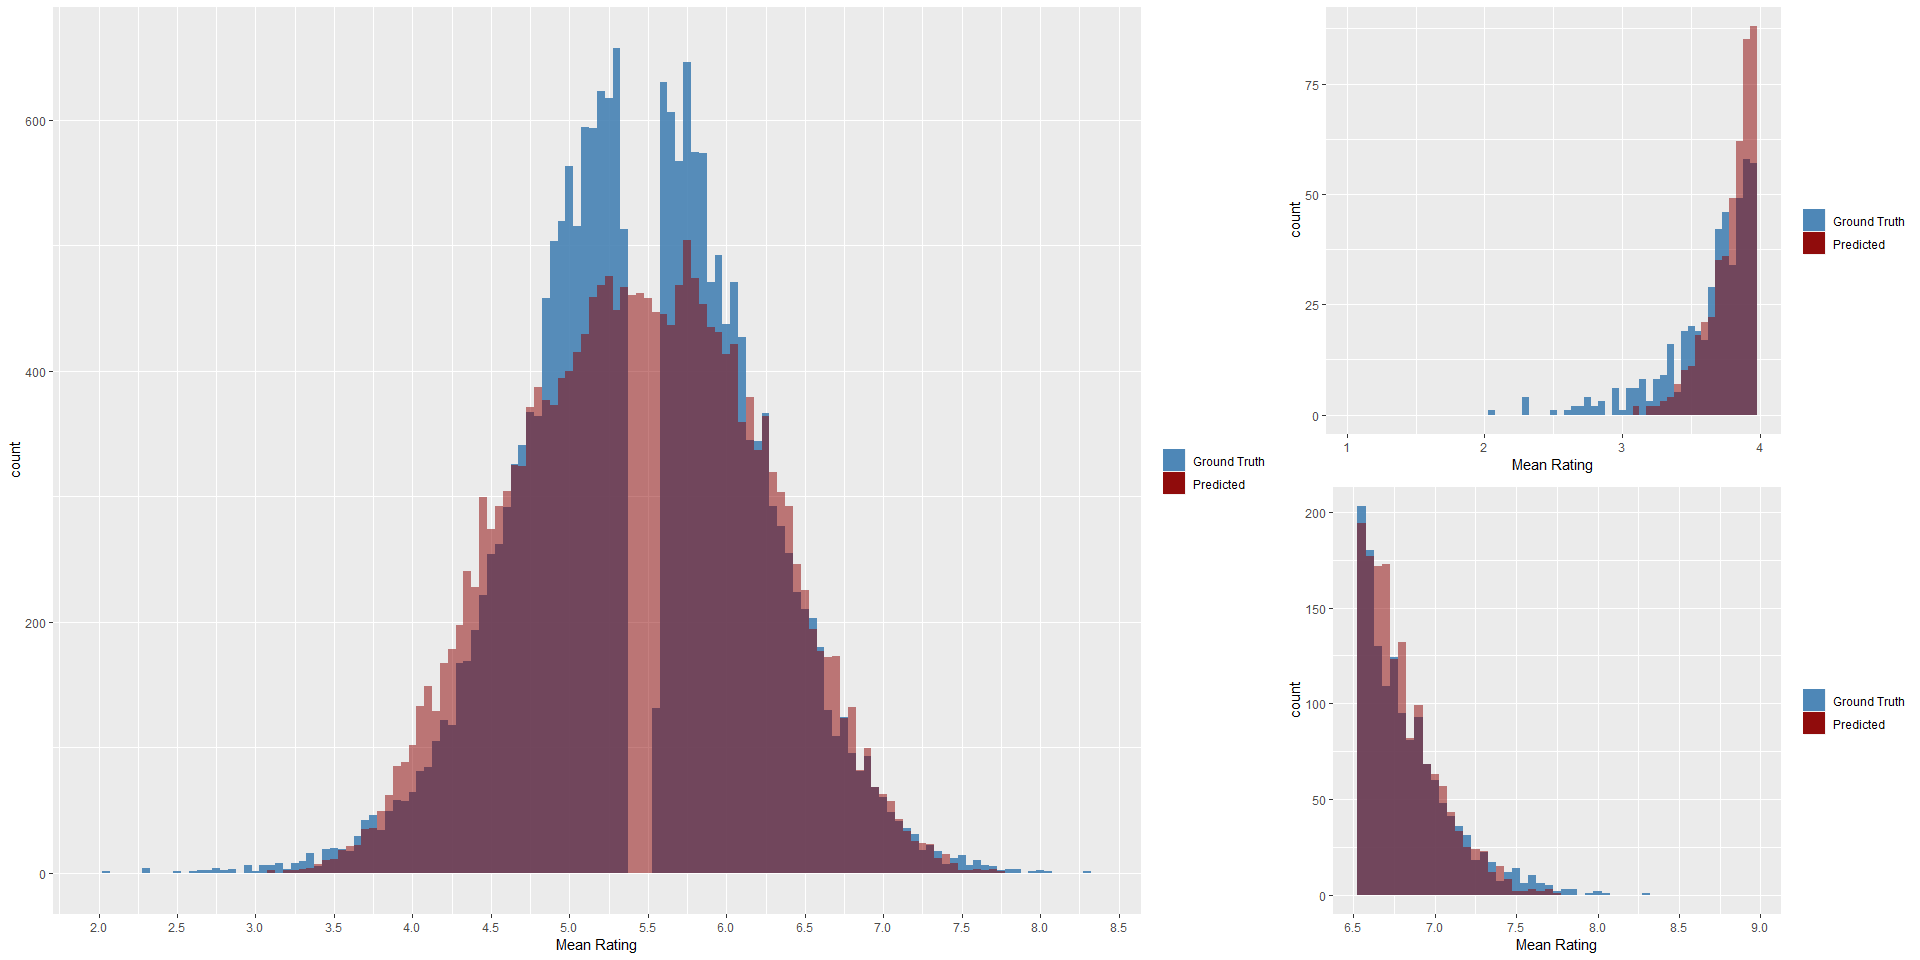 Big figure: Distribution of predicted mean ratings and ground truth rating on the test set. Small figures: Distribution on lower and upper end on the test set.